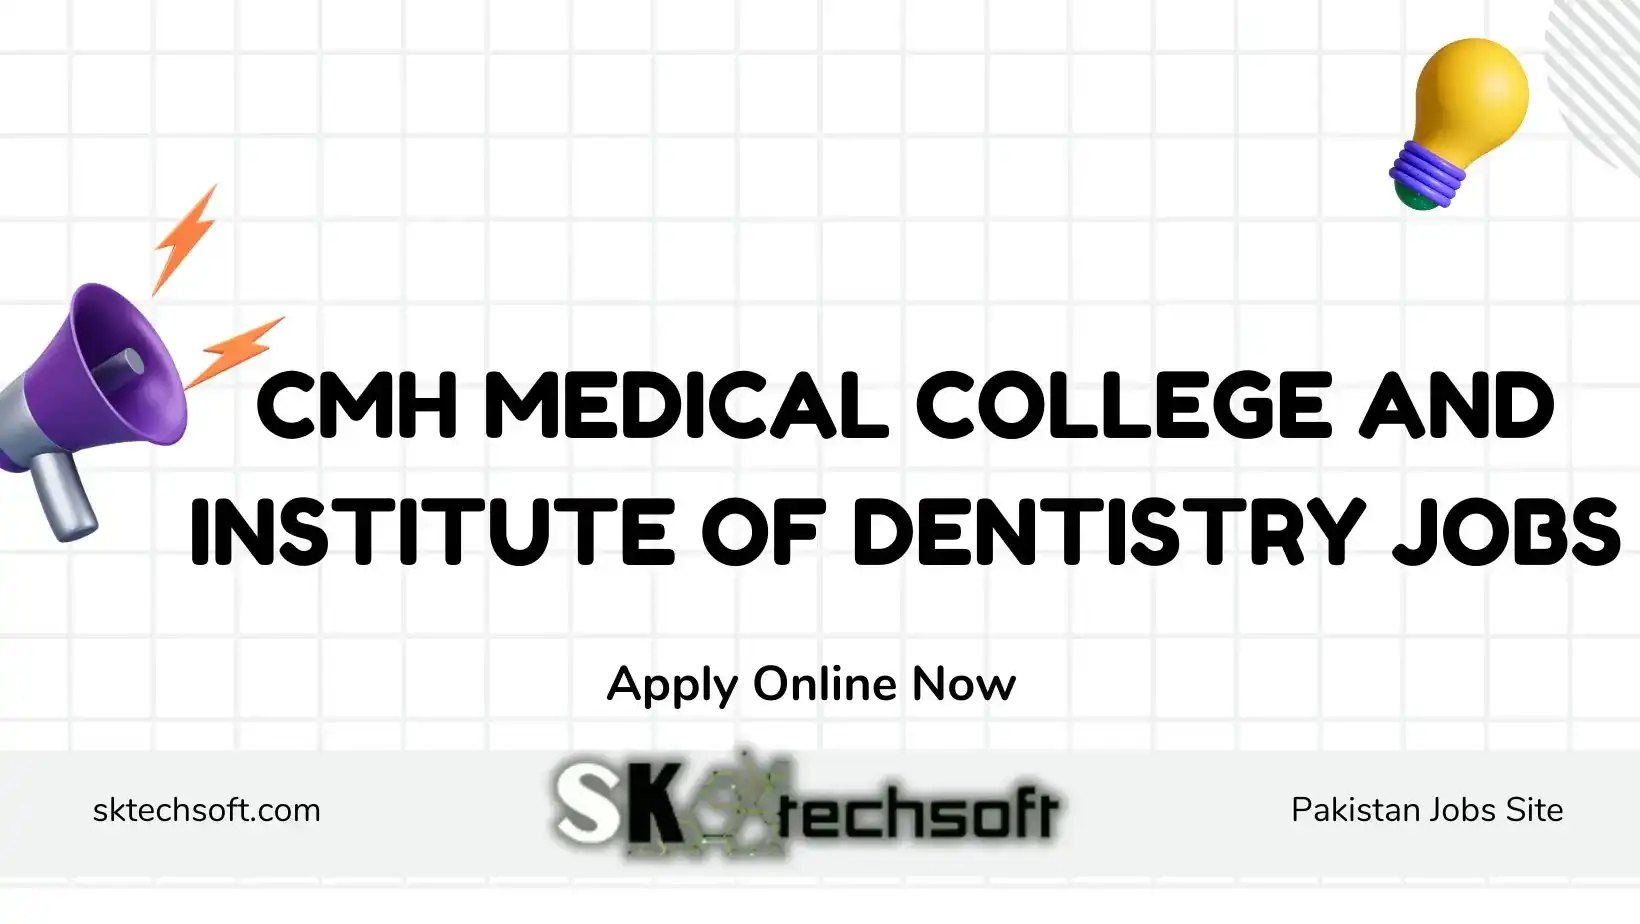 CMH Medical College and Institute of Dentistry Jobs